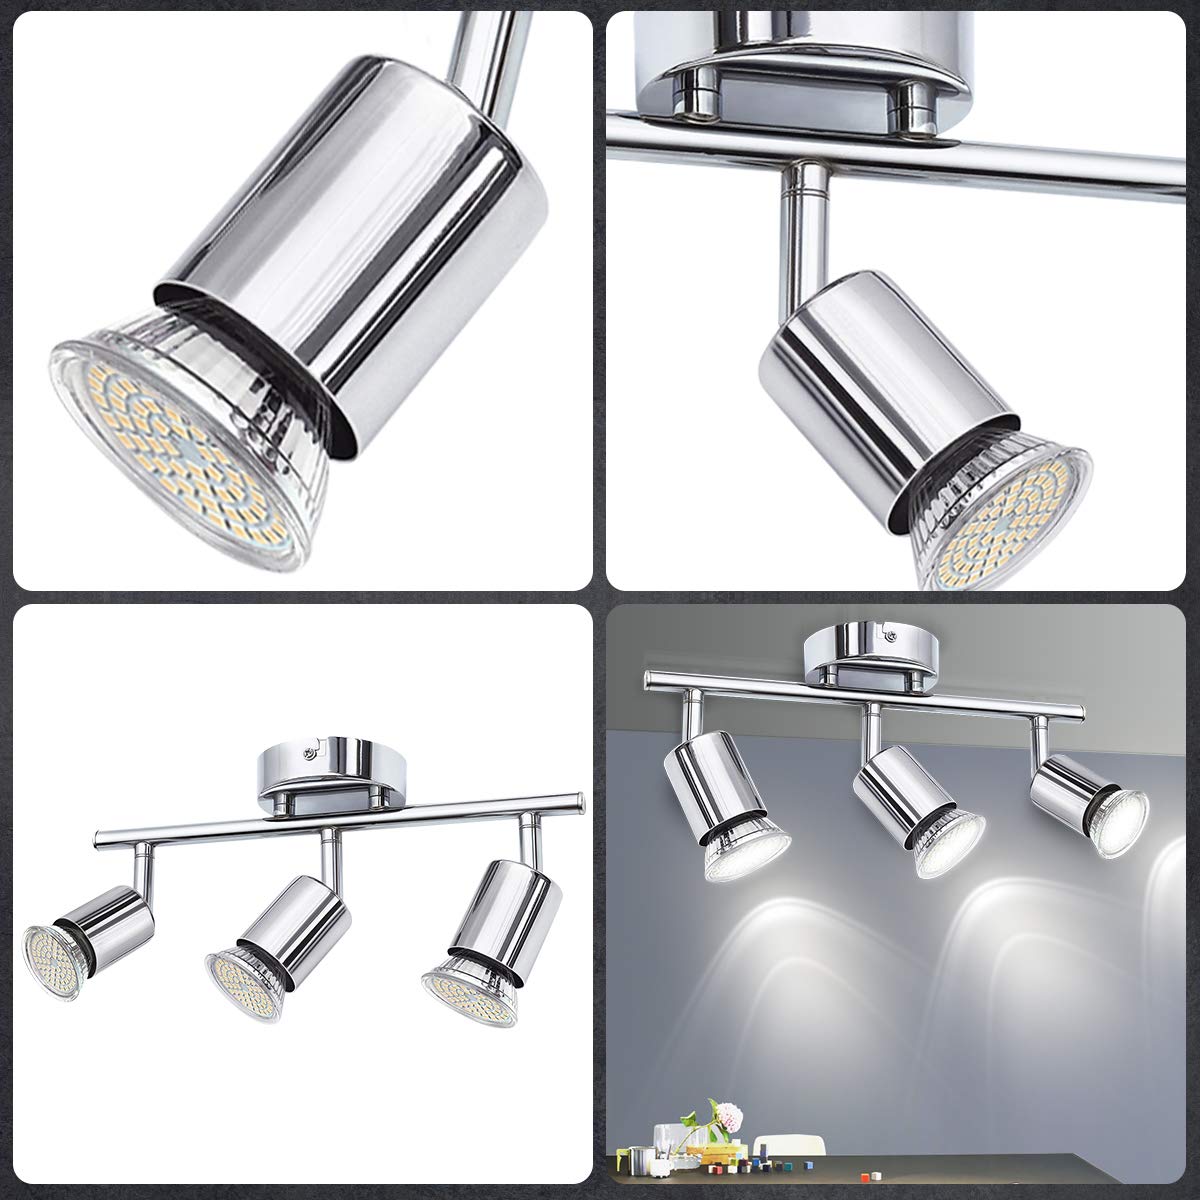 Modern Ceiling Light Lamp 3 GU10 Heads Multiple Rod Dome Night Lamps 100-240V-AULEY